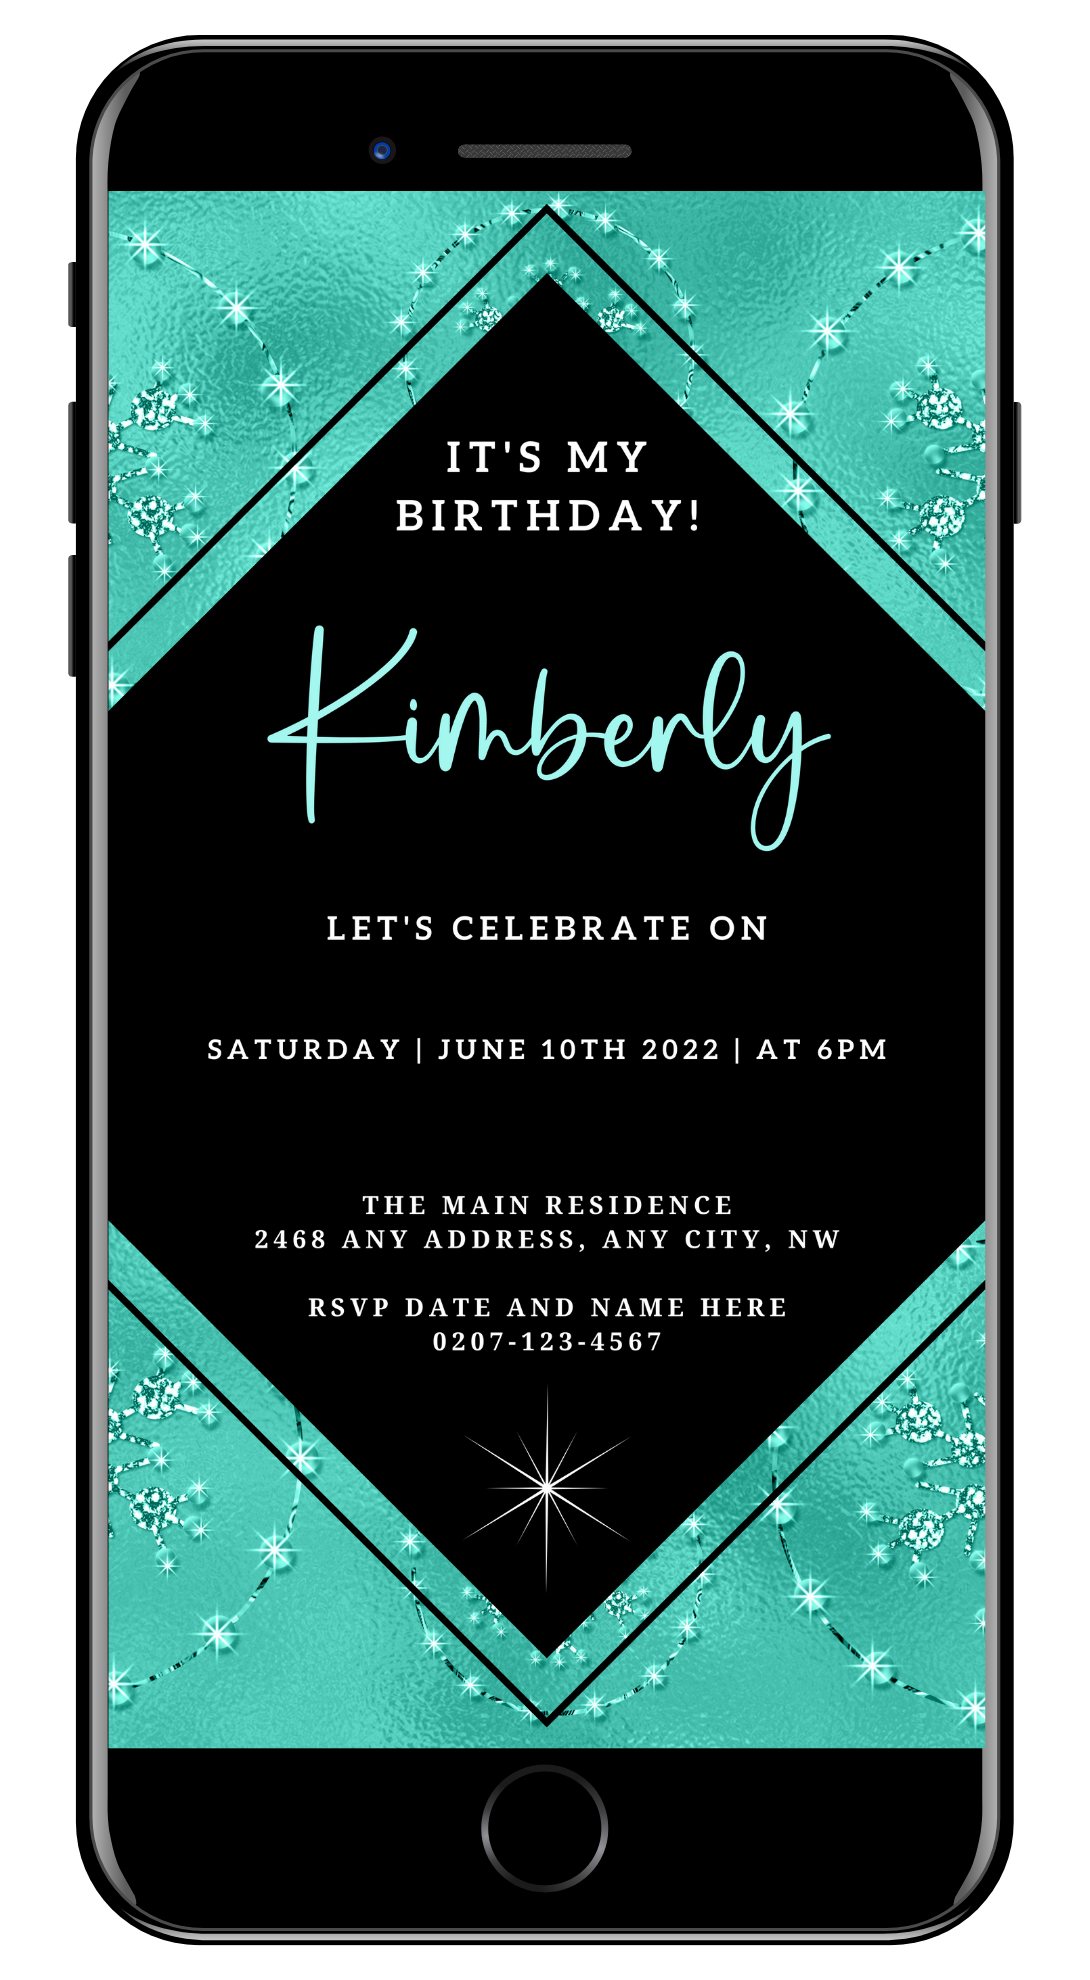 Editable Teal Black Diamond Crystal Birthday Evite, showcasing customizable text and design elements for a digital invitation, ideal for smartphone use and sharing via messaging apps.